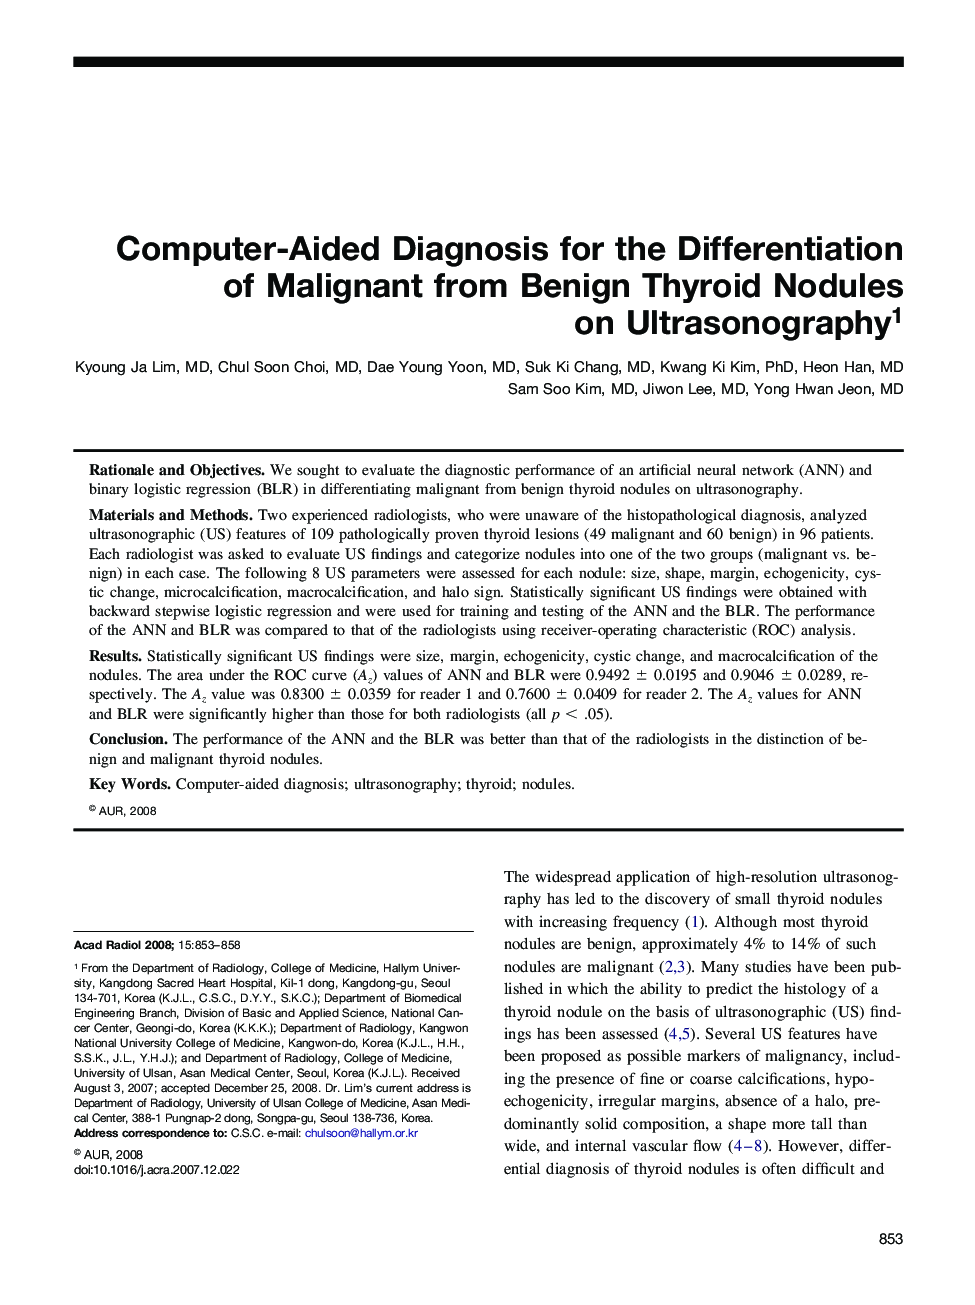 Computer-Aided Diagnosis for the Differentiation of Malignant from Benign Thyroid Nodules on Ultrasonography